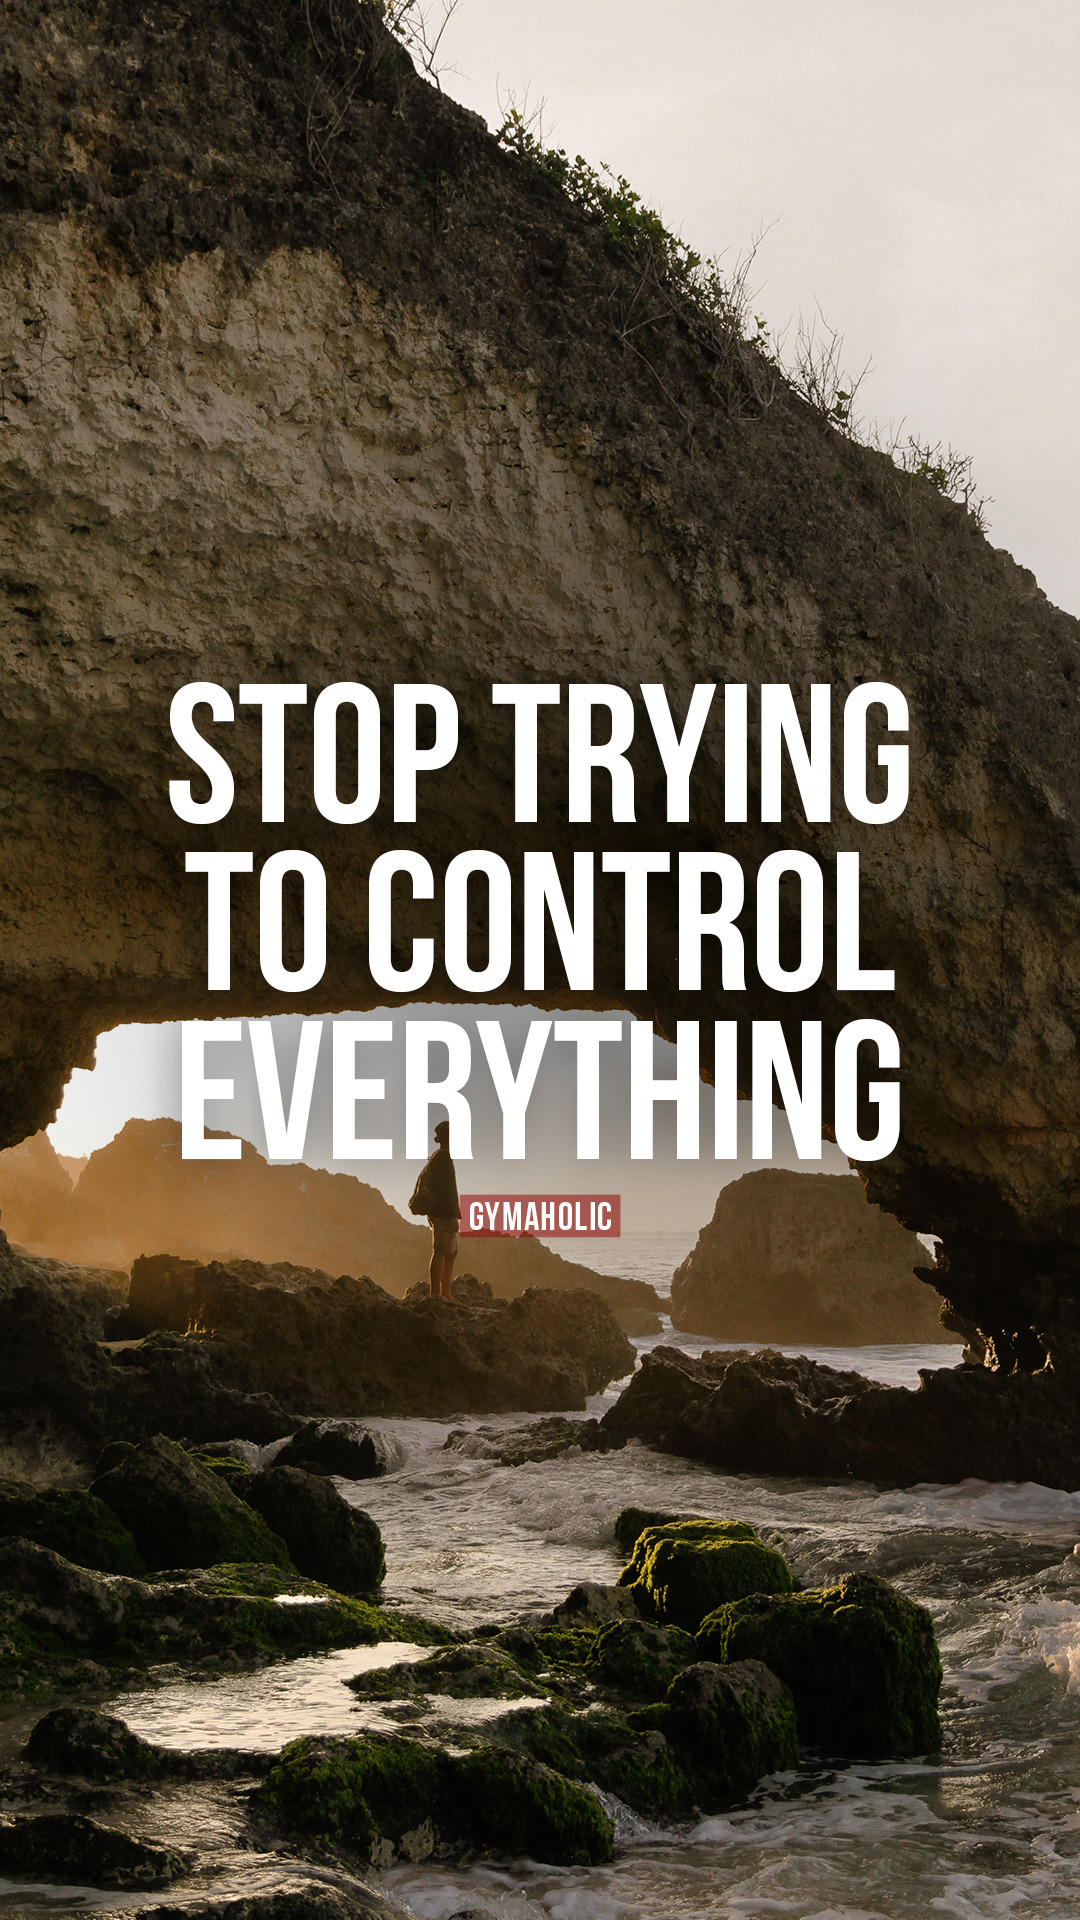 Stop trying to control everything